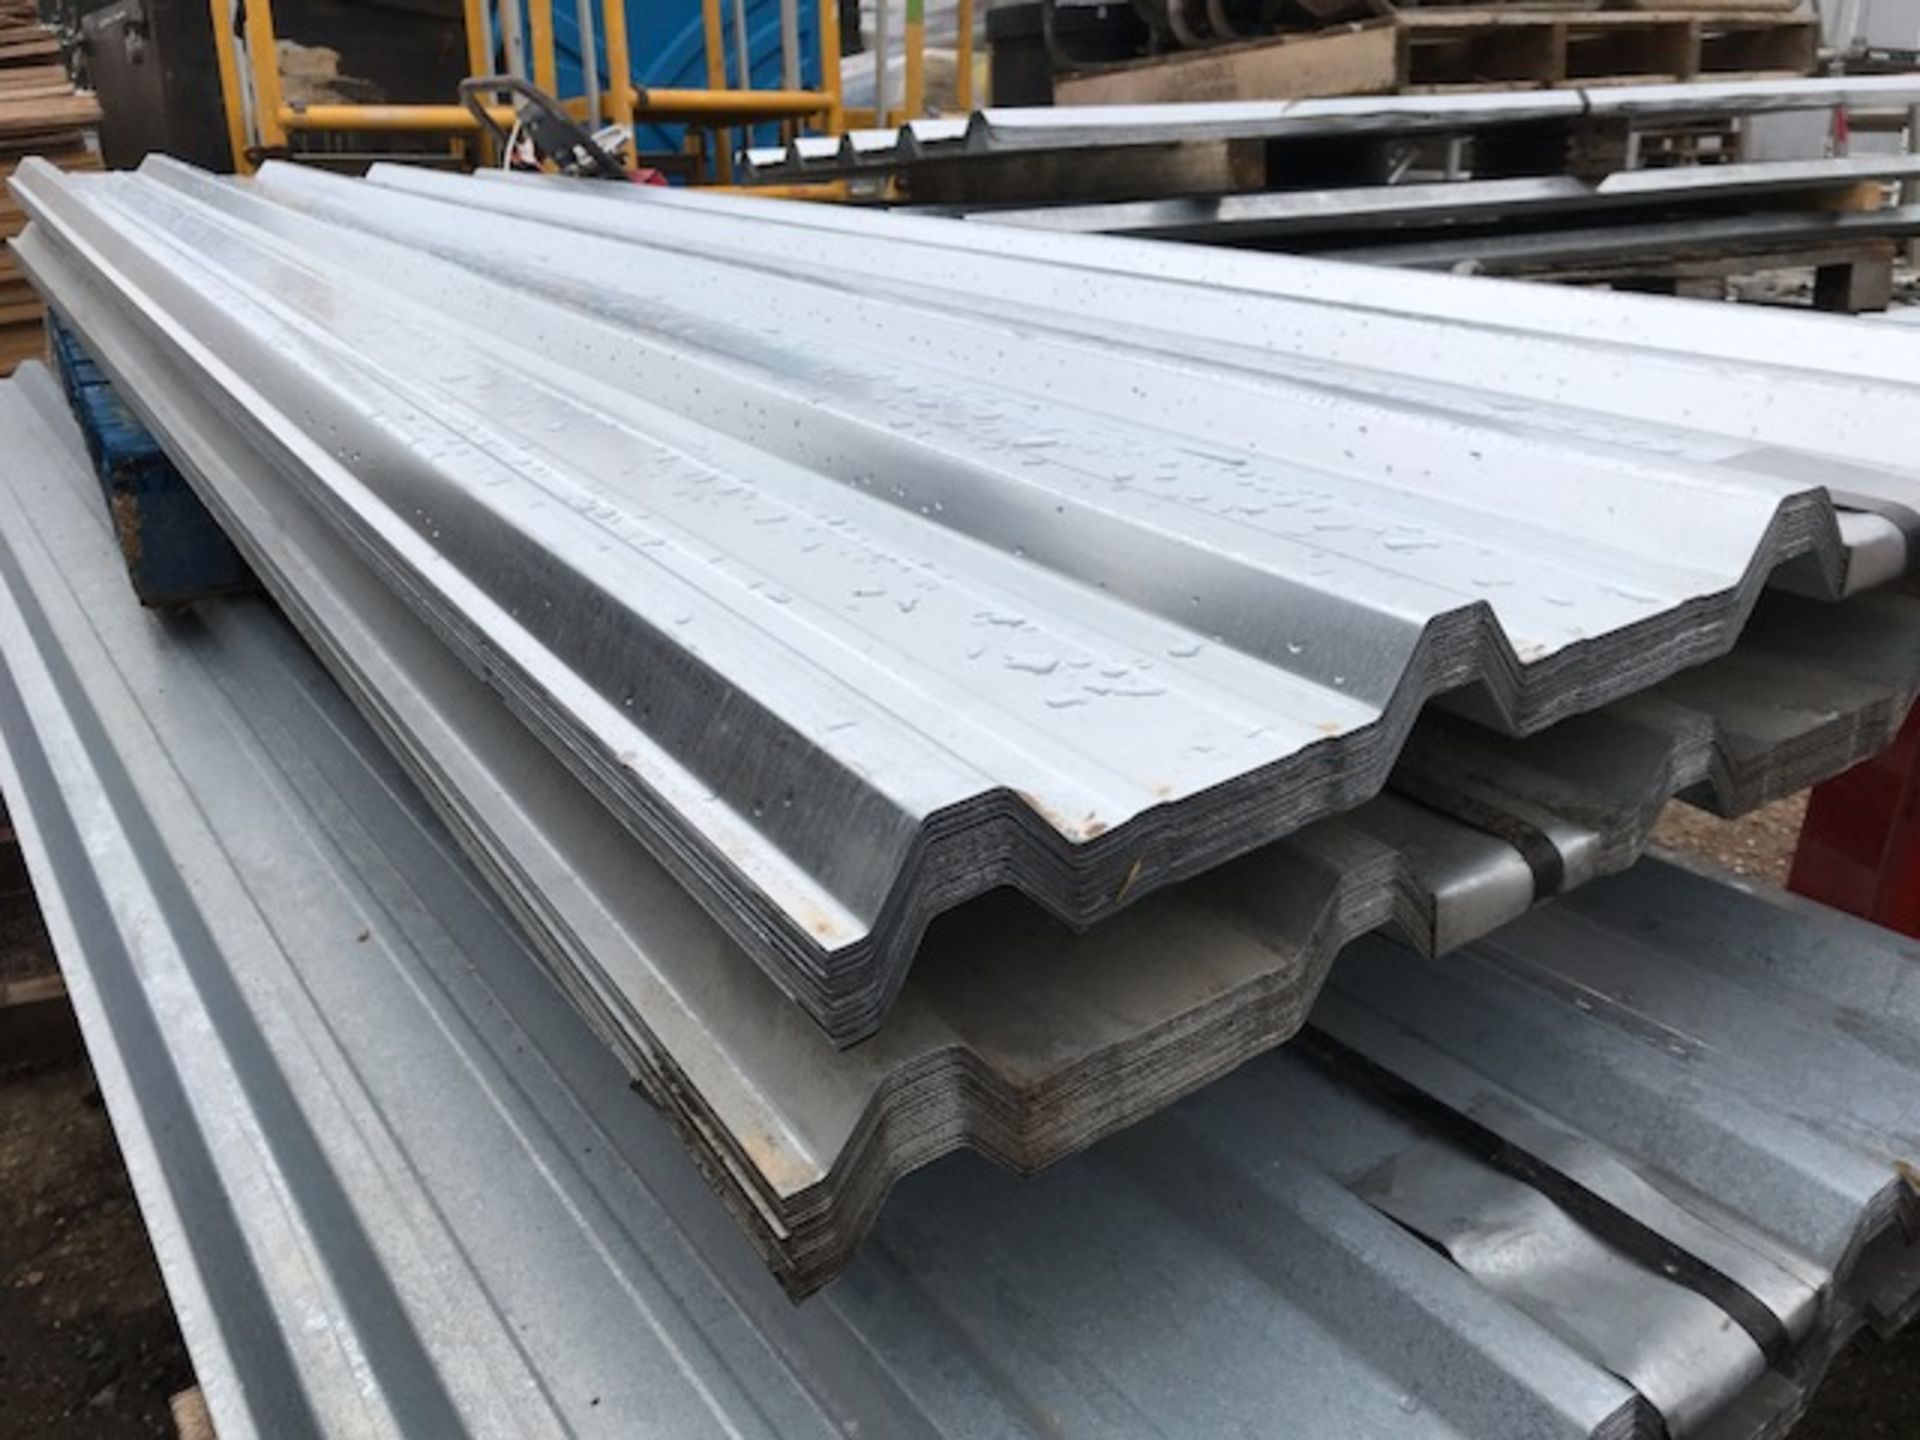 50NO 10FT BOX PROFILE GALVANISED ROOF SHEETS, SUPPLIED IN 2 BUNDLES OF 25NO. - Image 2 of 2